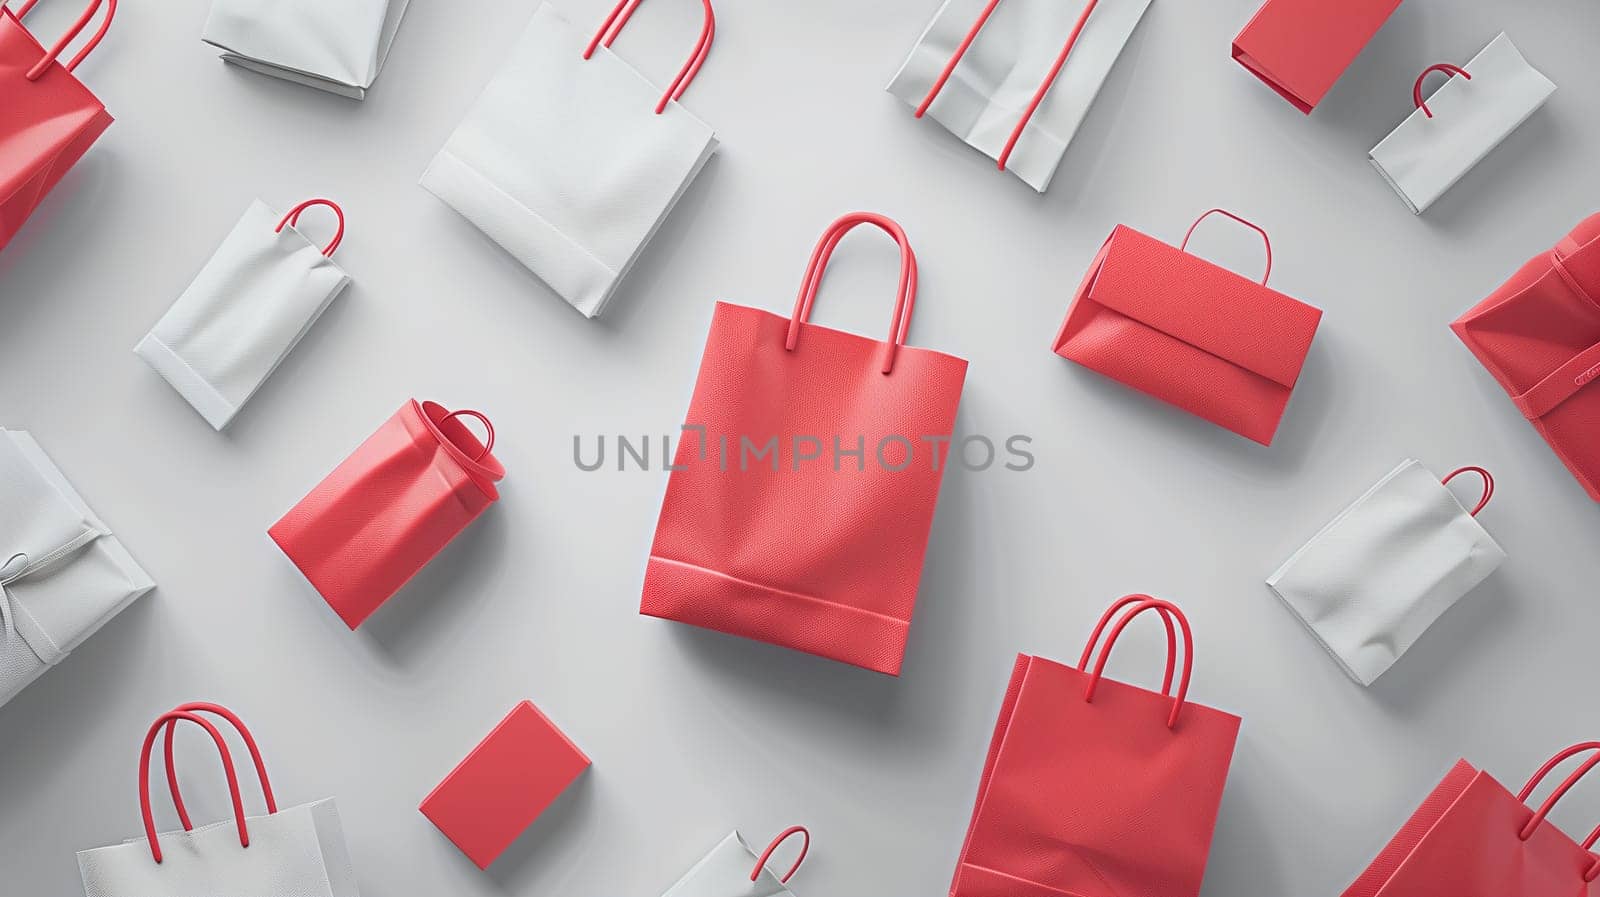 A group of red and white bags are neatly arranged on a table, possibly symbolizing a sale or Black Friday event. The bags appear to be in various sizes and styles, creating a visually striking display.